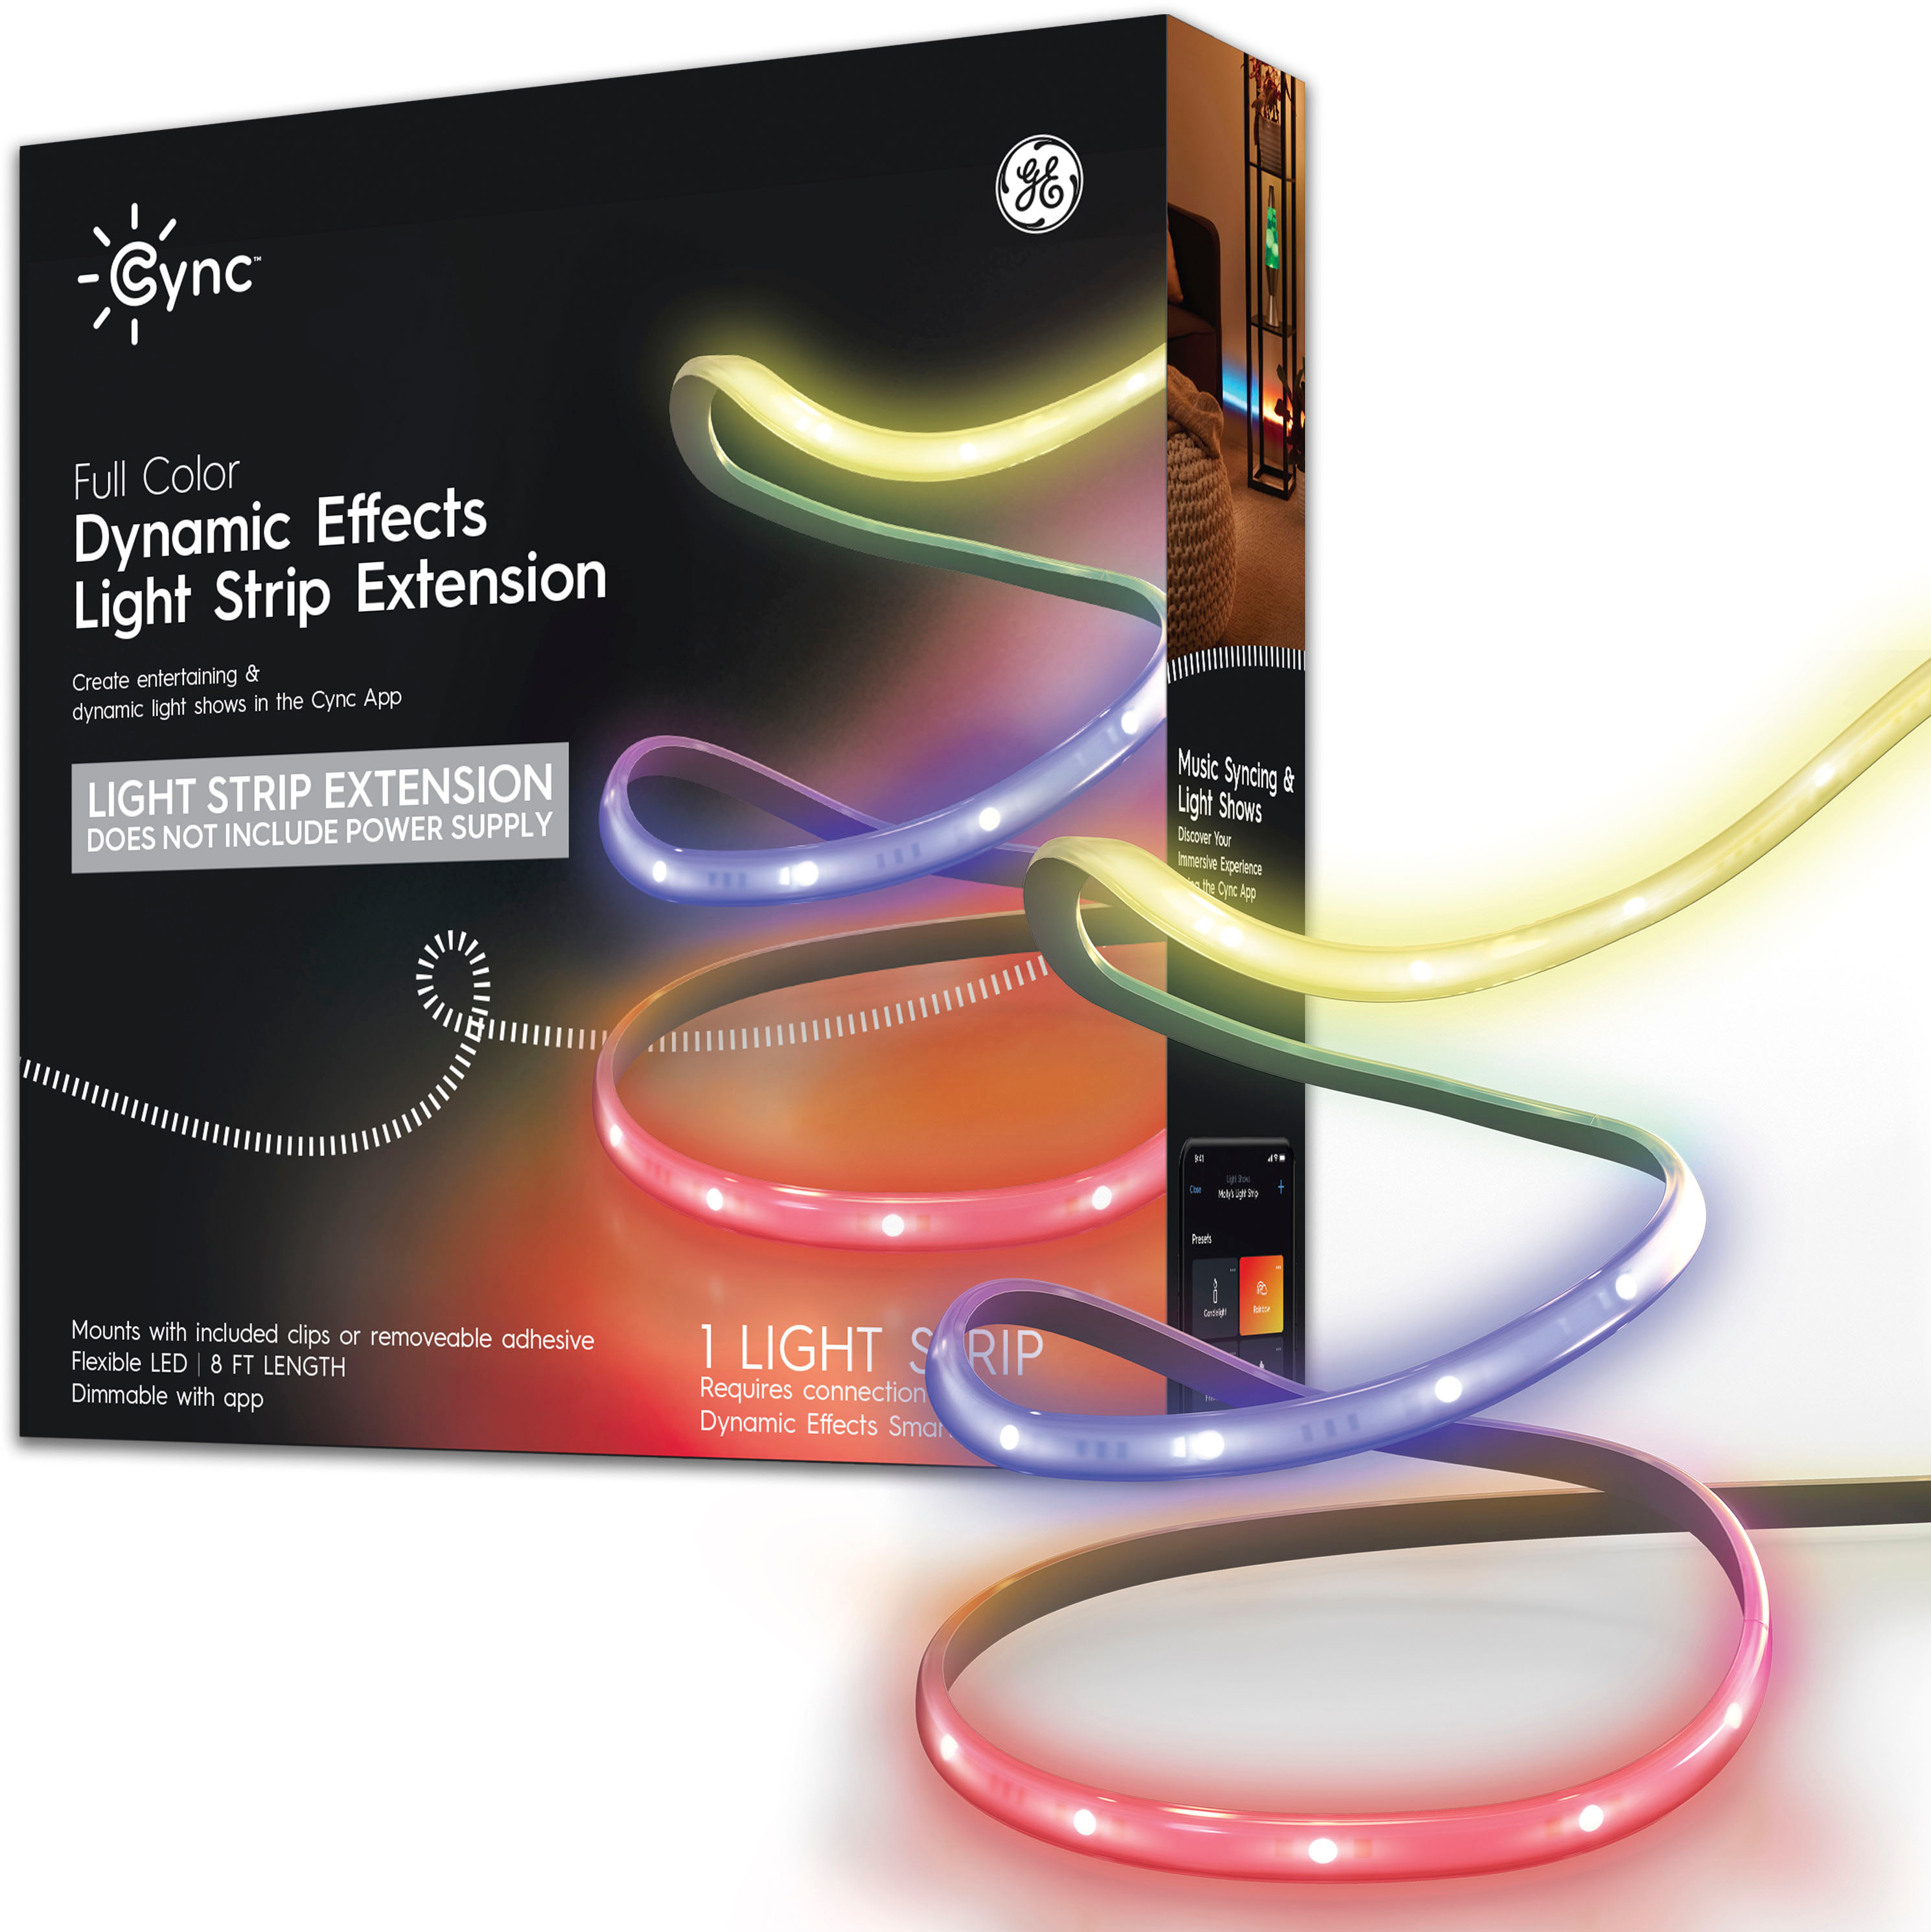 GE CYNC foot Indoor Bluetooth/Wi-Fi Color Changing Smart LED Light Strip Extension (Power Supply Sold Separately) Full Color 93130386 - Best Buy